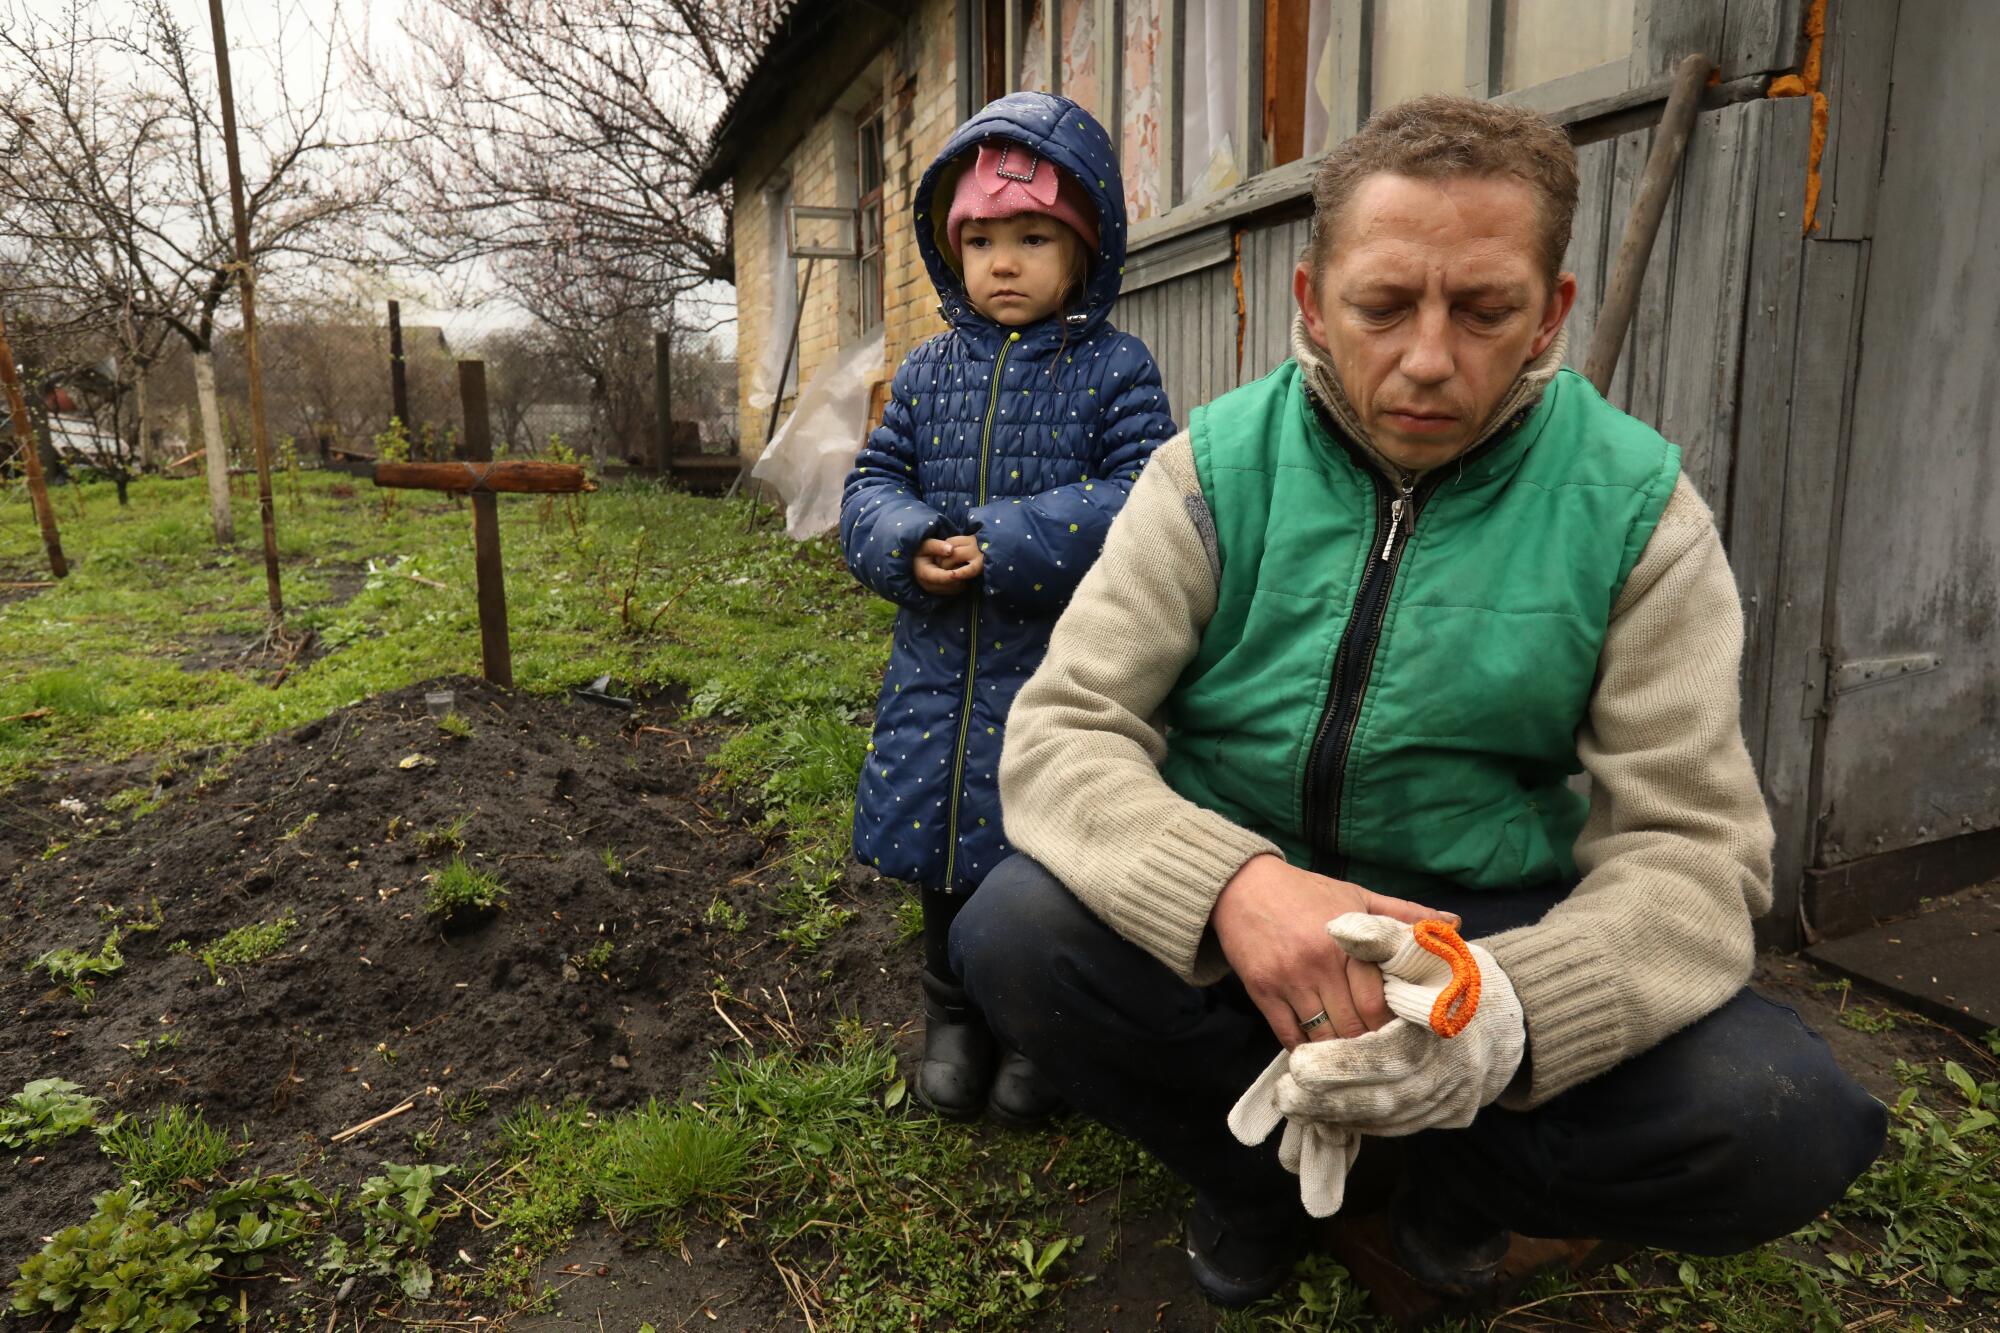 Anatolii Oliinyk, age 38, right, buried his father in the garden three days ago when he returned home to Bucha 